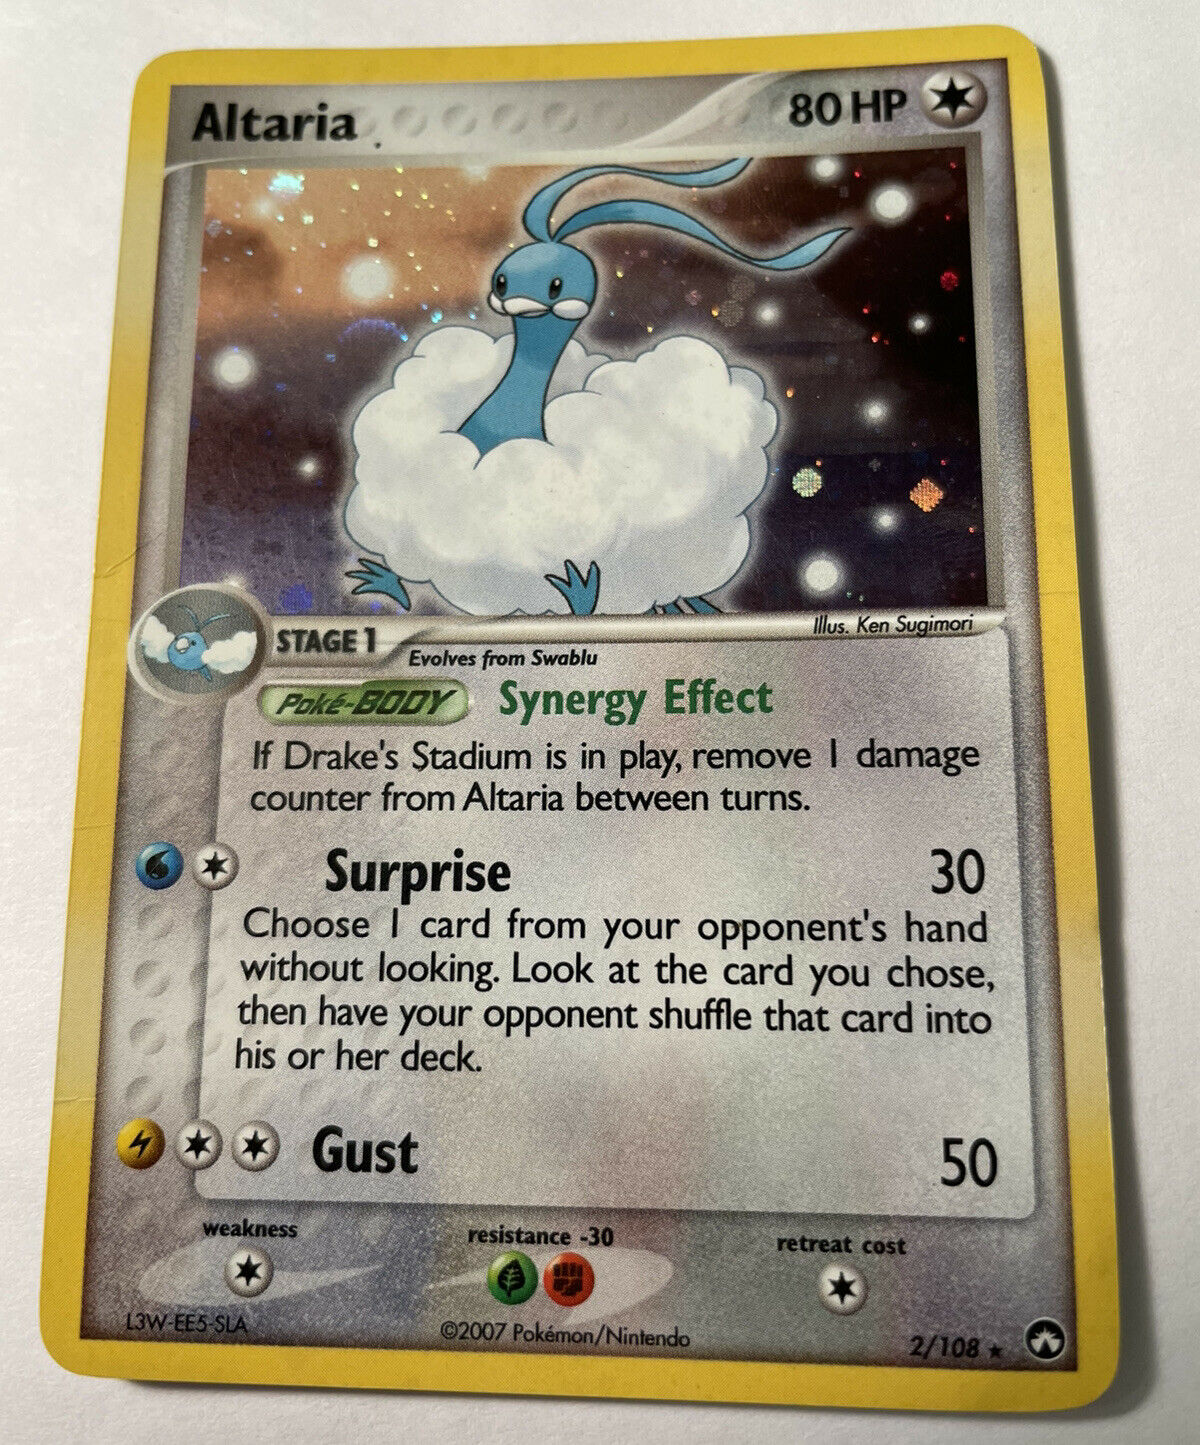 Pokemon TCG - EX Power Keepers Altaria Holographic Card - 2/108 - Image 1